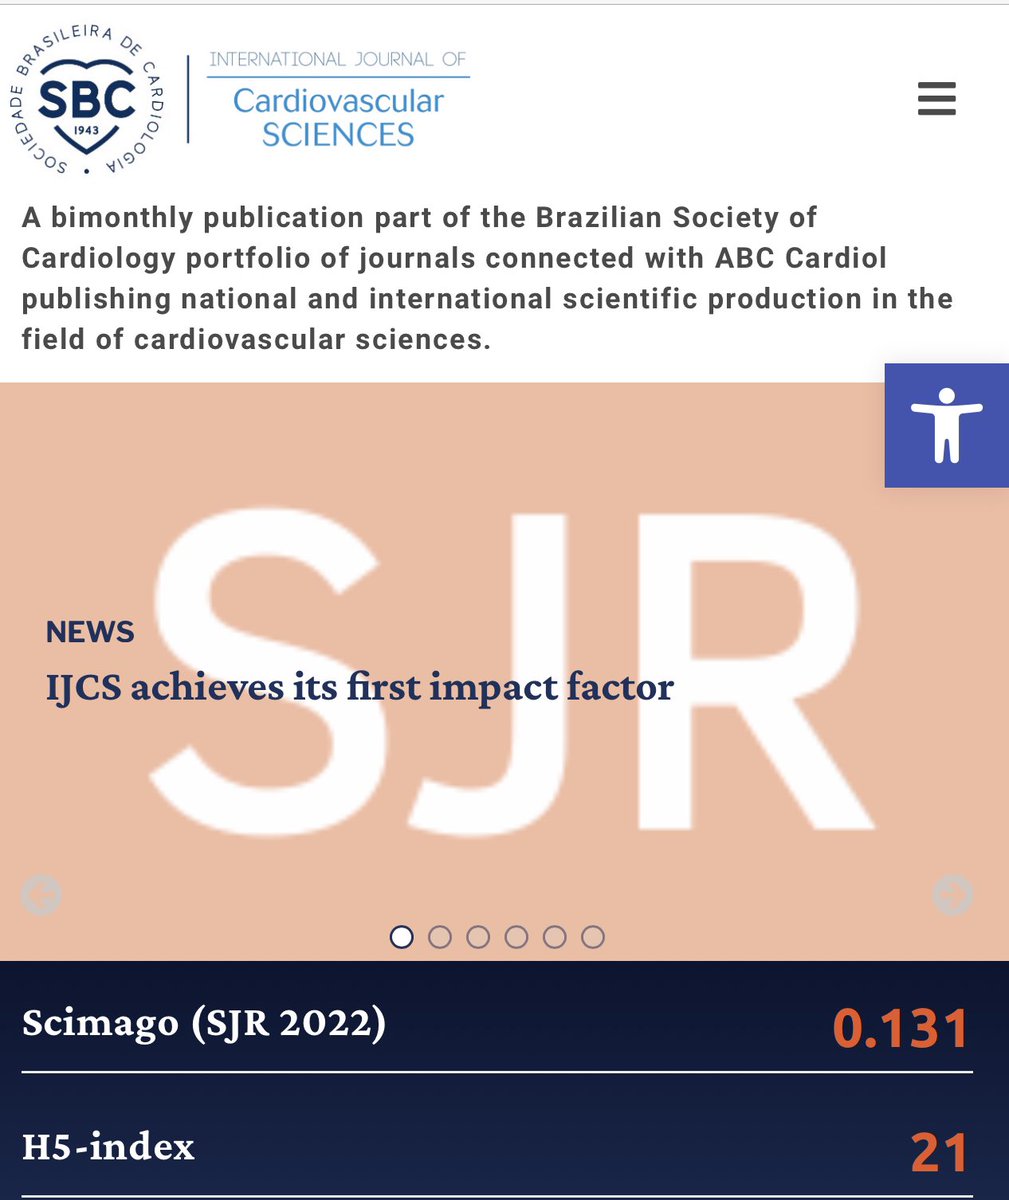 #Amazing The International Journal of Cardiovascular Science (IJCS) has reached its first impact factor. After being indexed in Scopus in 2022, IJCS has now received recognition from Scimago (SJR 2022) with an impact factor of 0.131 @Scopus @RedeSciELO @onlineIJCS #CardioTwitter